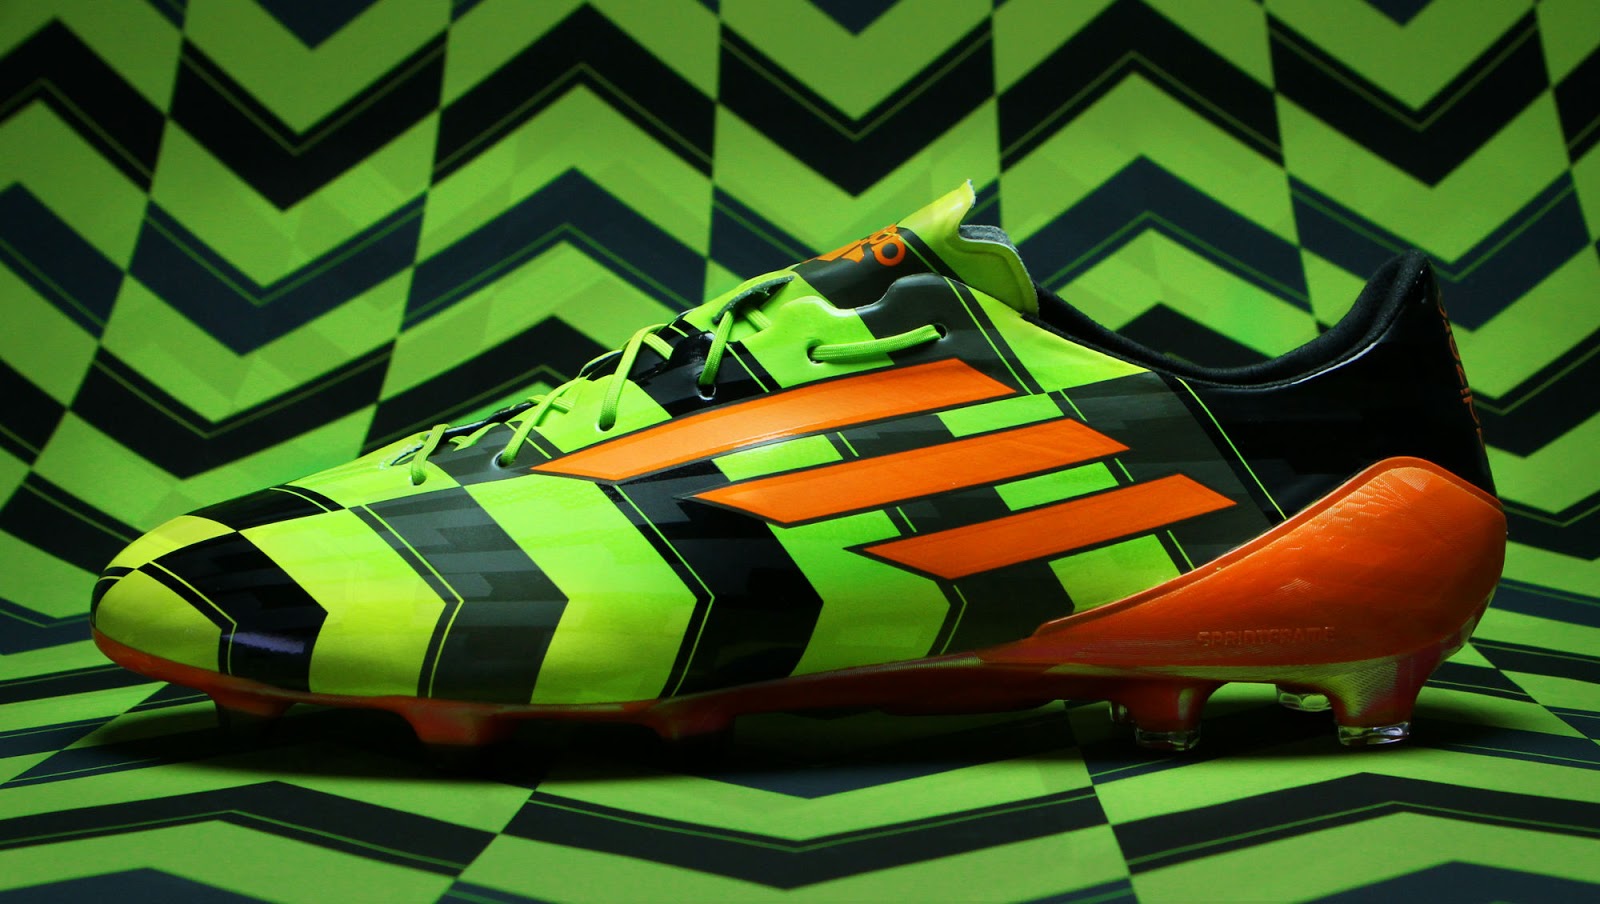 Adidas Adizero F50 Crazylight Boot Released - In End It's Not The 99 grams Boot Footy Headlines